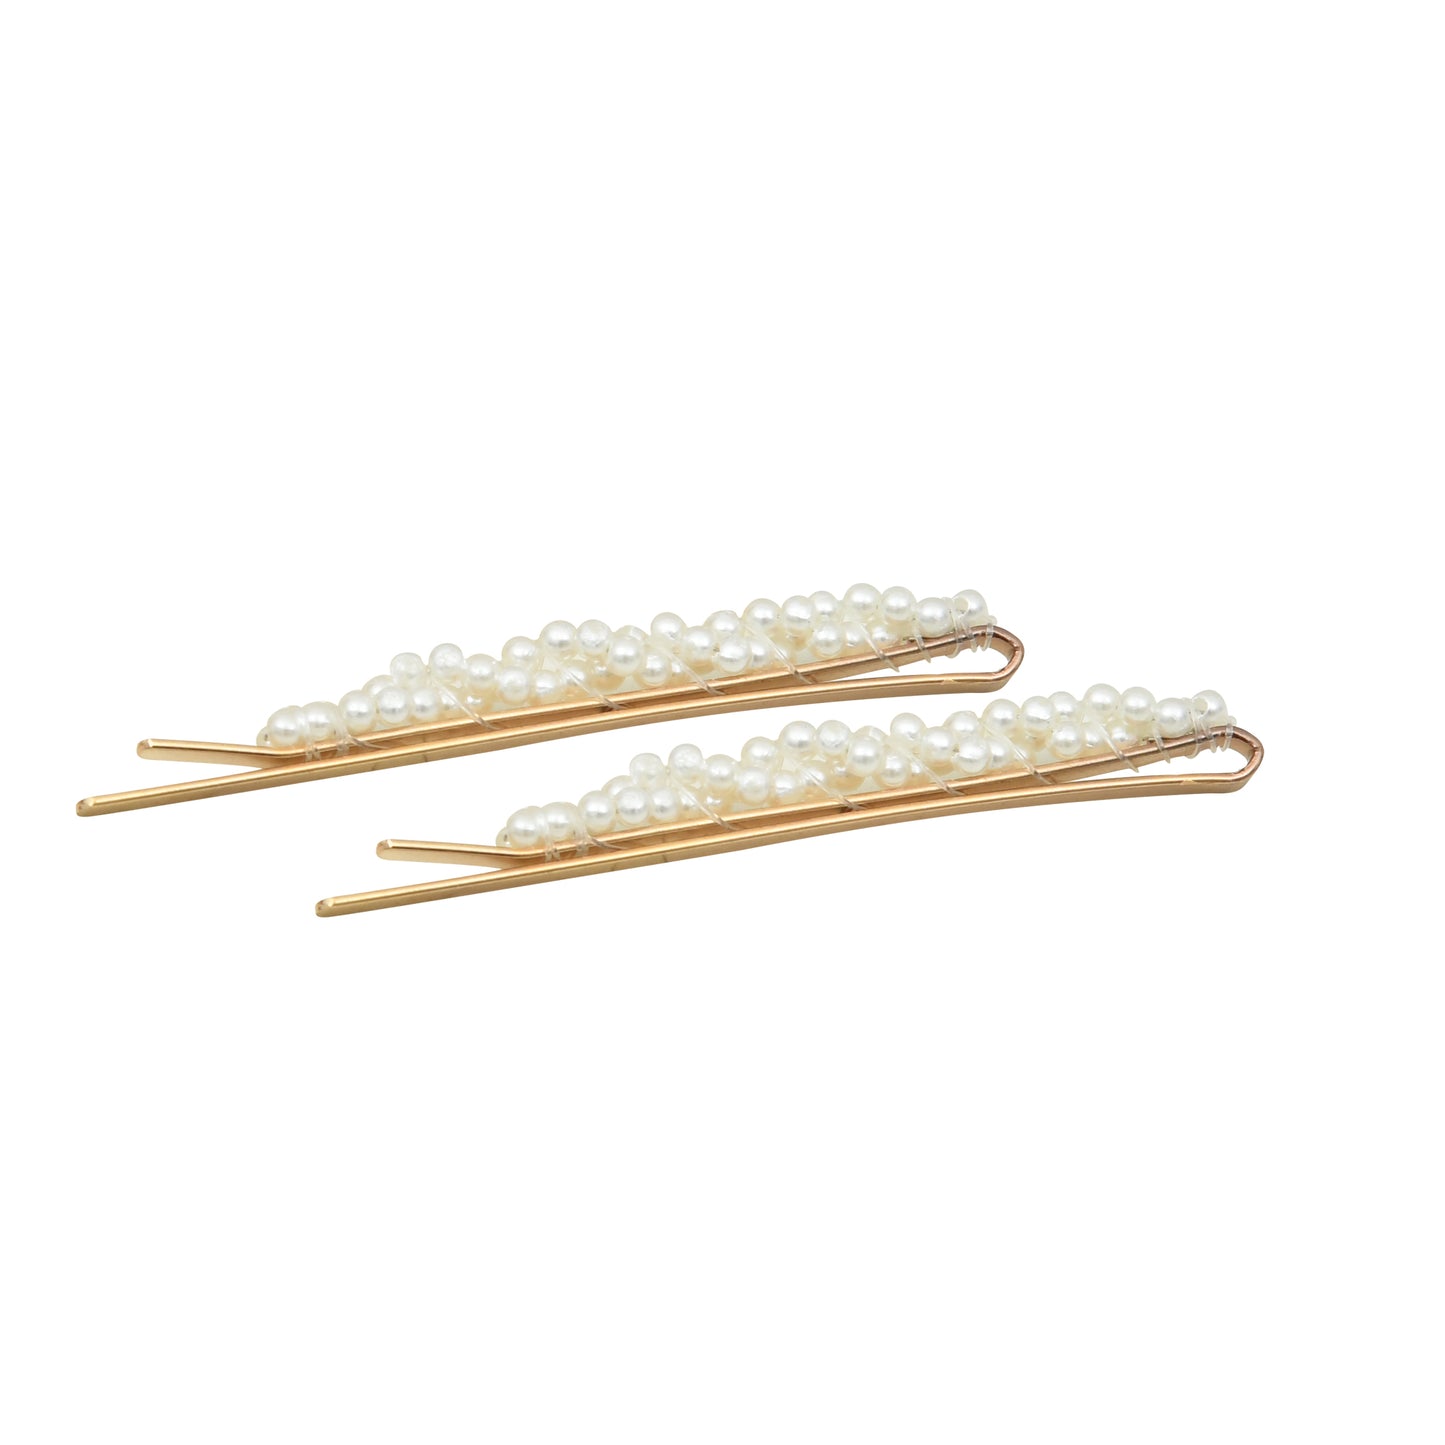 Set of 2 Off White Pearls Girls Hair Pins